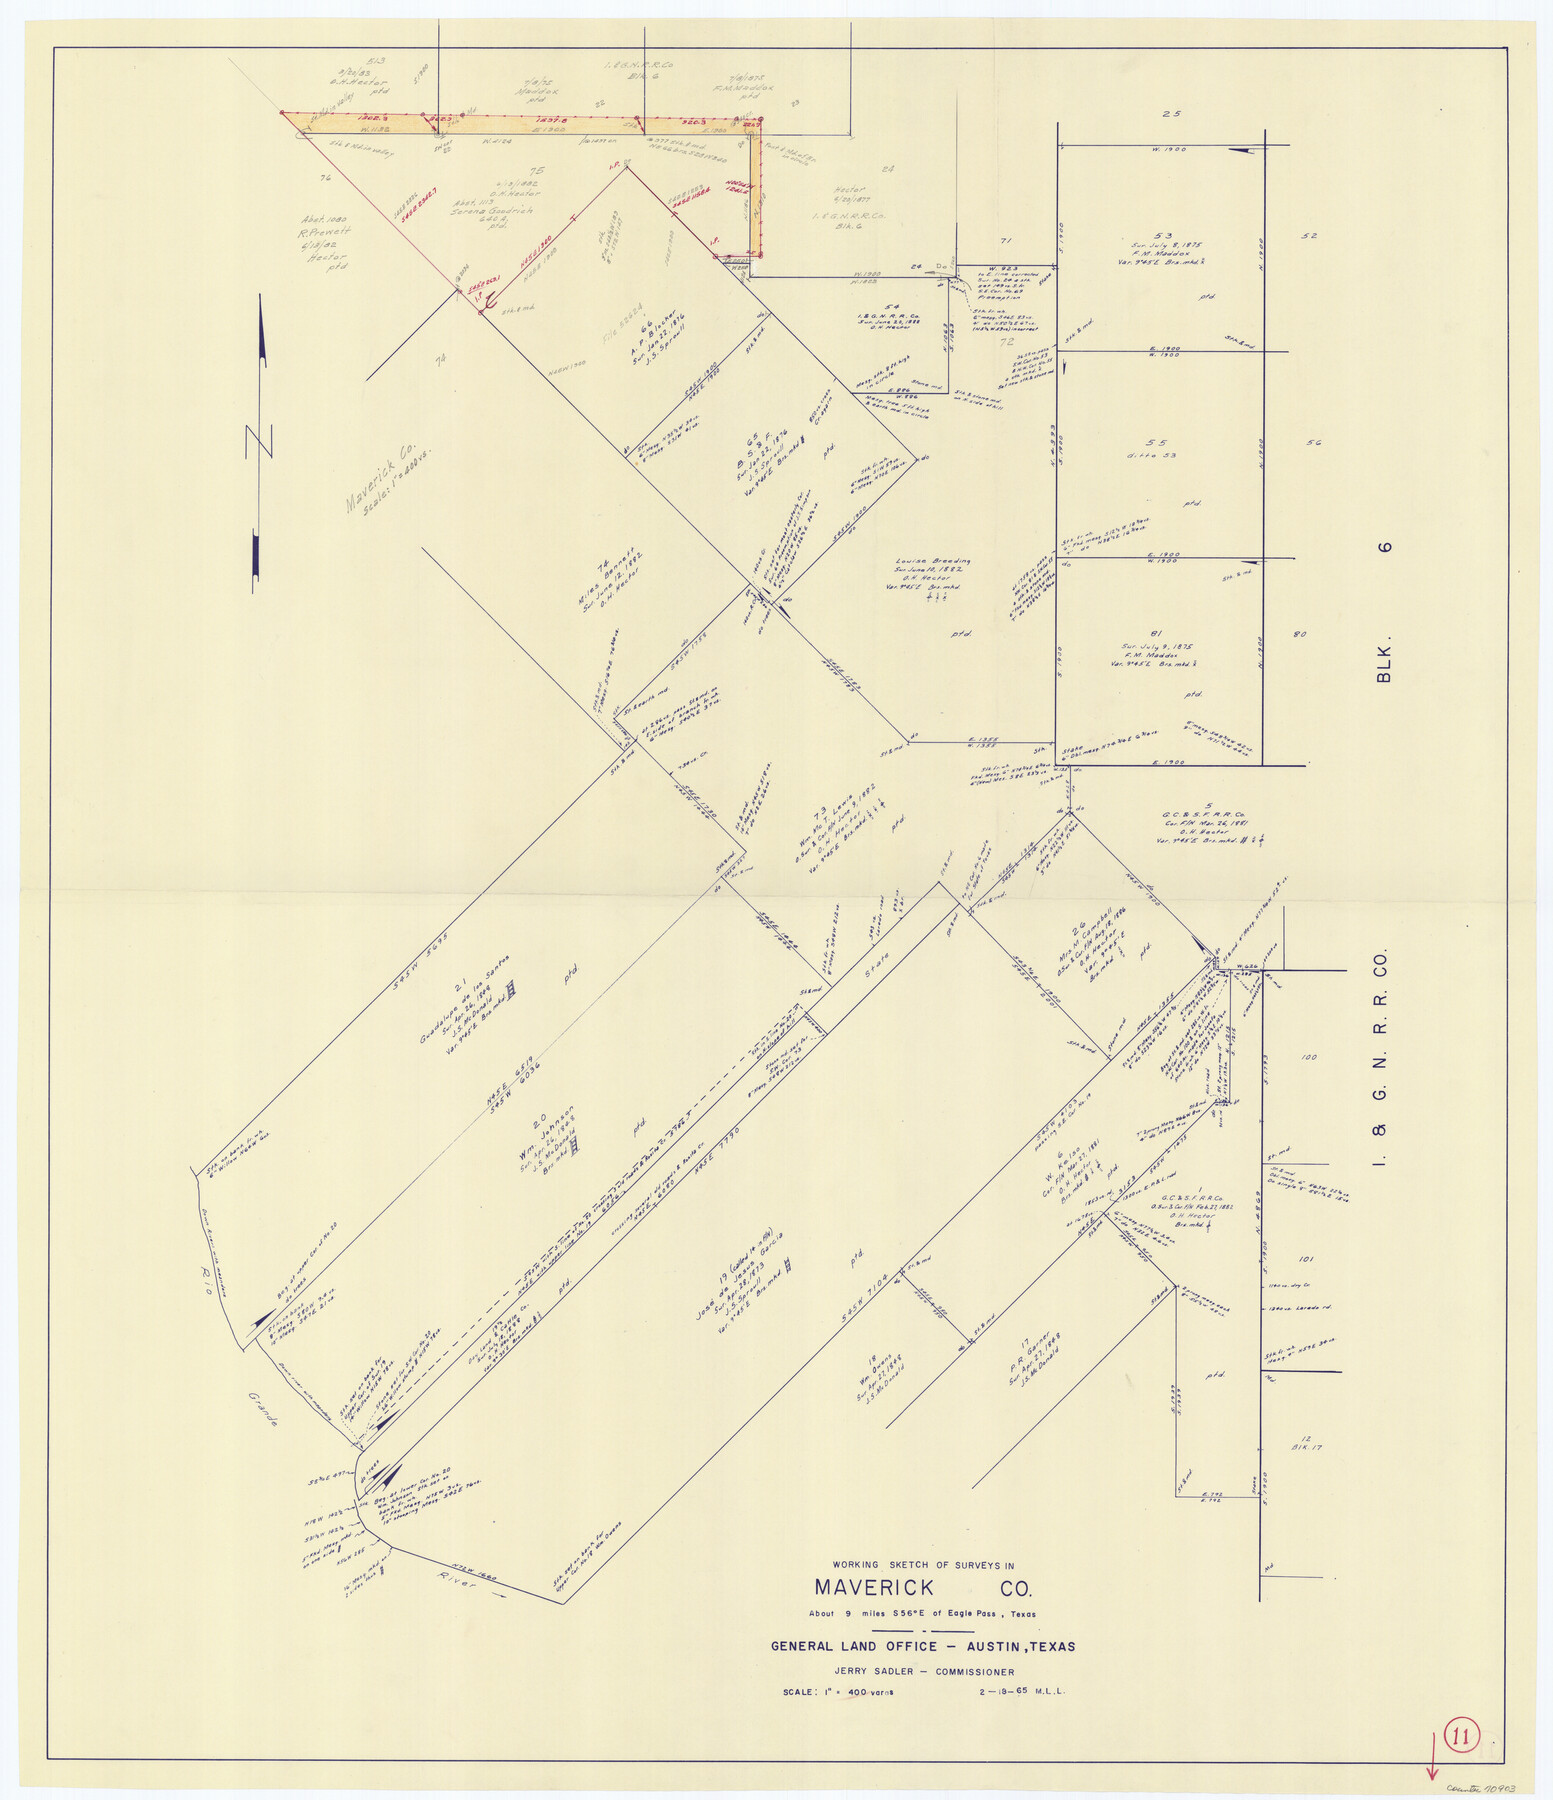 70903, Maverick County Working Sketch 11, General Map Collection